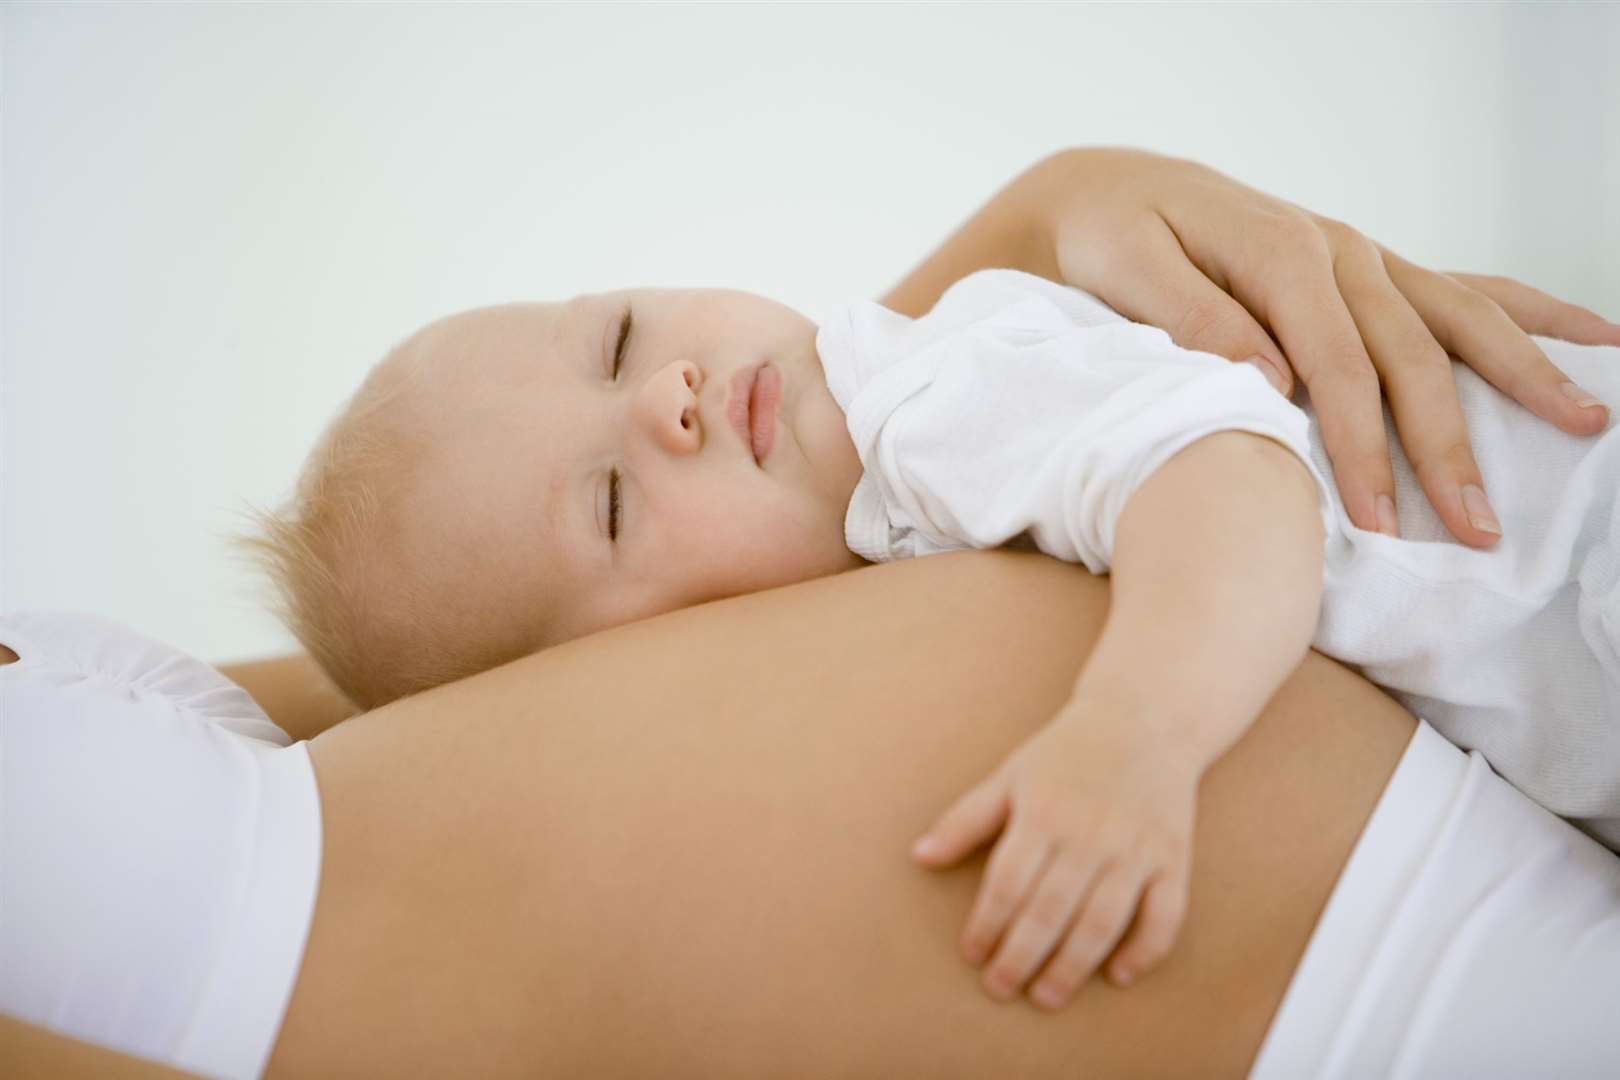 The most large babies were born in the area covered by Maidstone and Tunbridge Wells NHS Trust. Picture: Goodshot/Thinkstock